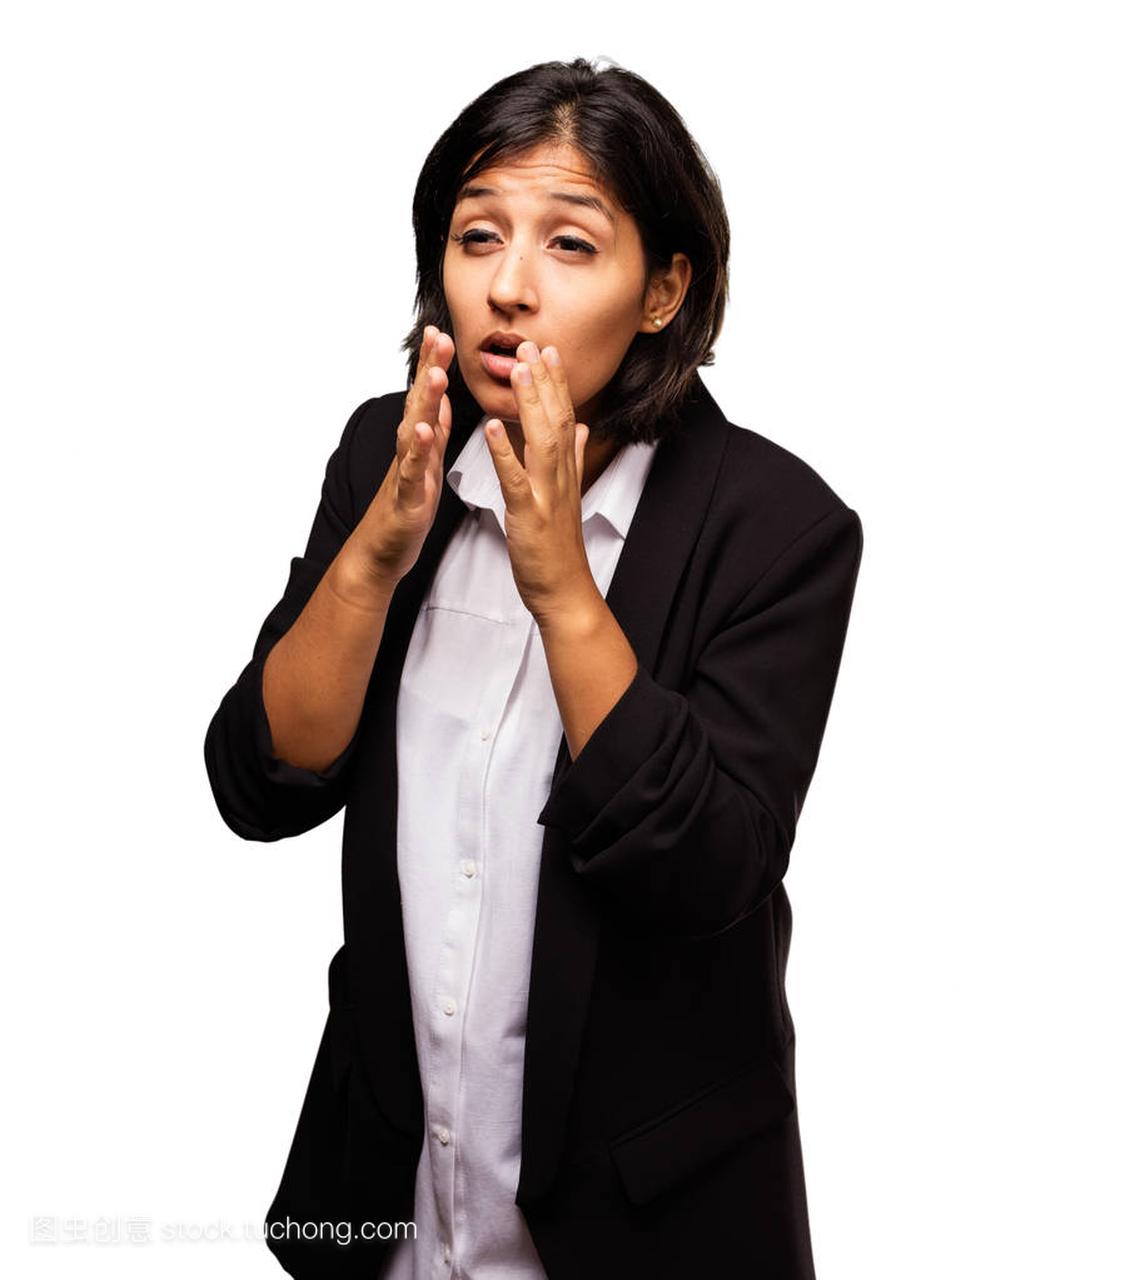 latin business woman coughing